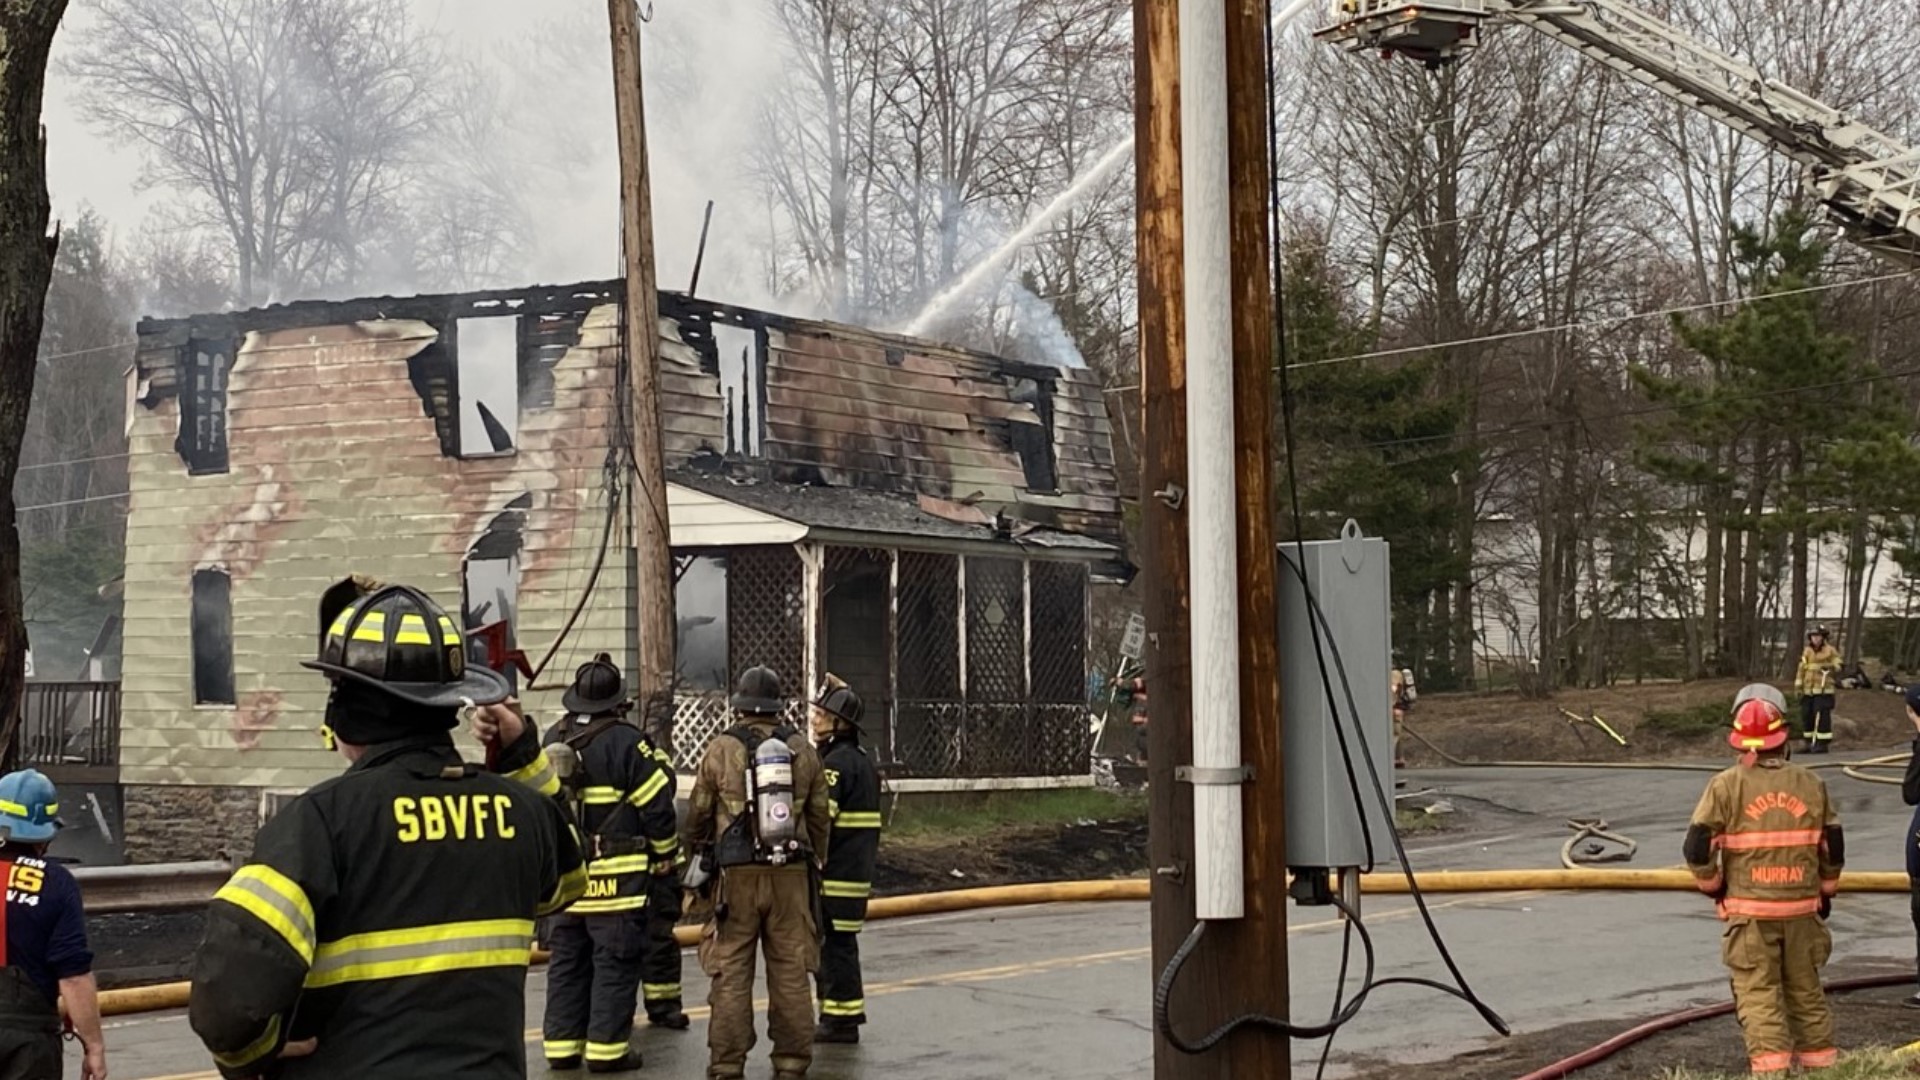 Flames broke out just after 2 p.m. Saturday along the 500 block of Main Street in Gouldsboro.